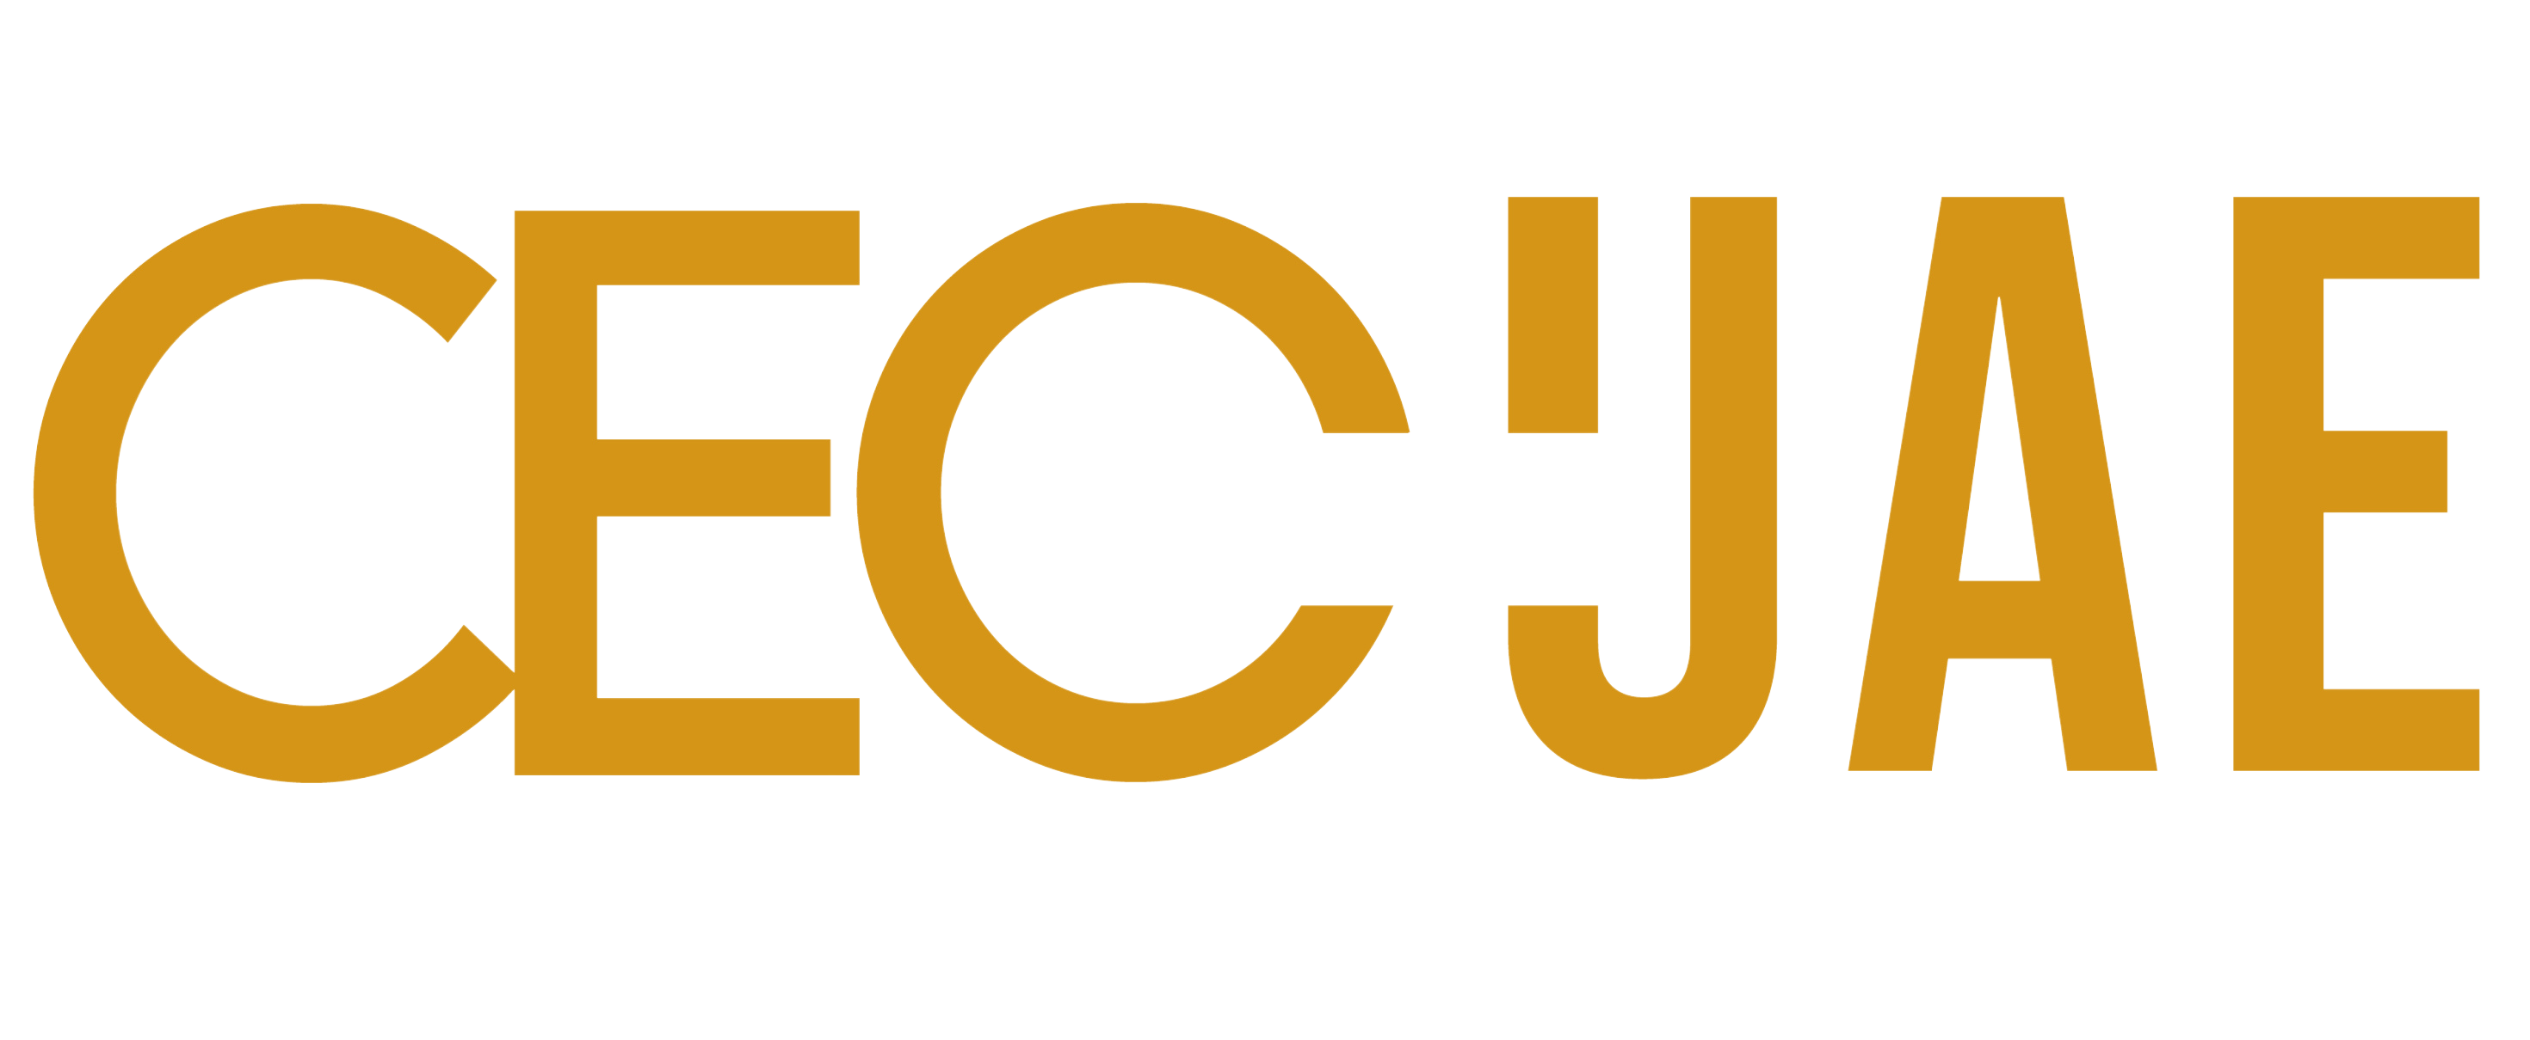 CEO Weekly 